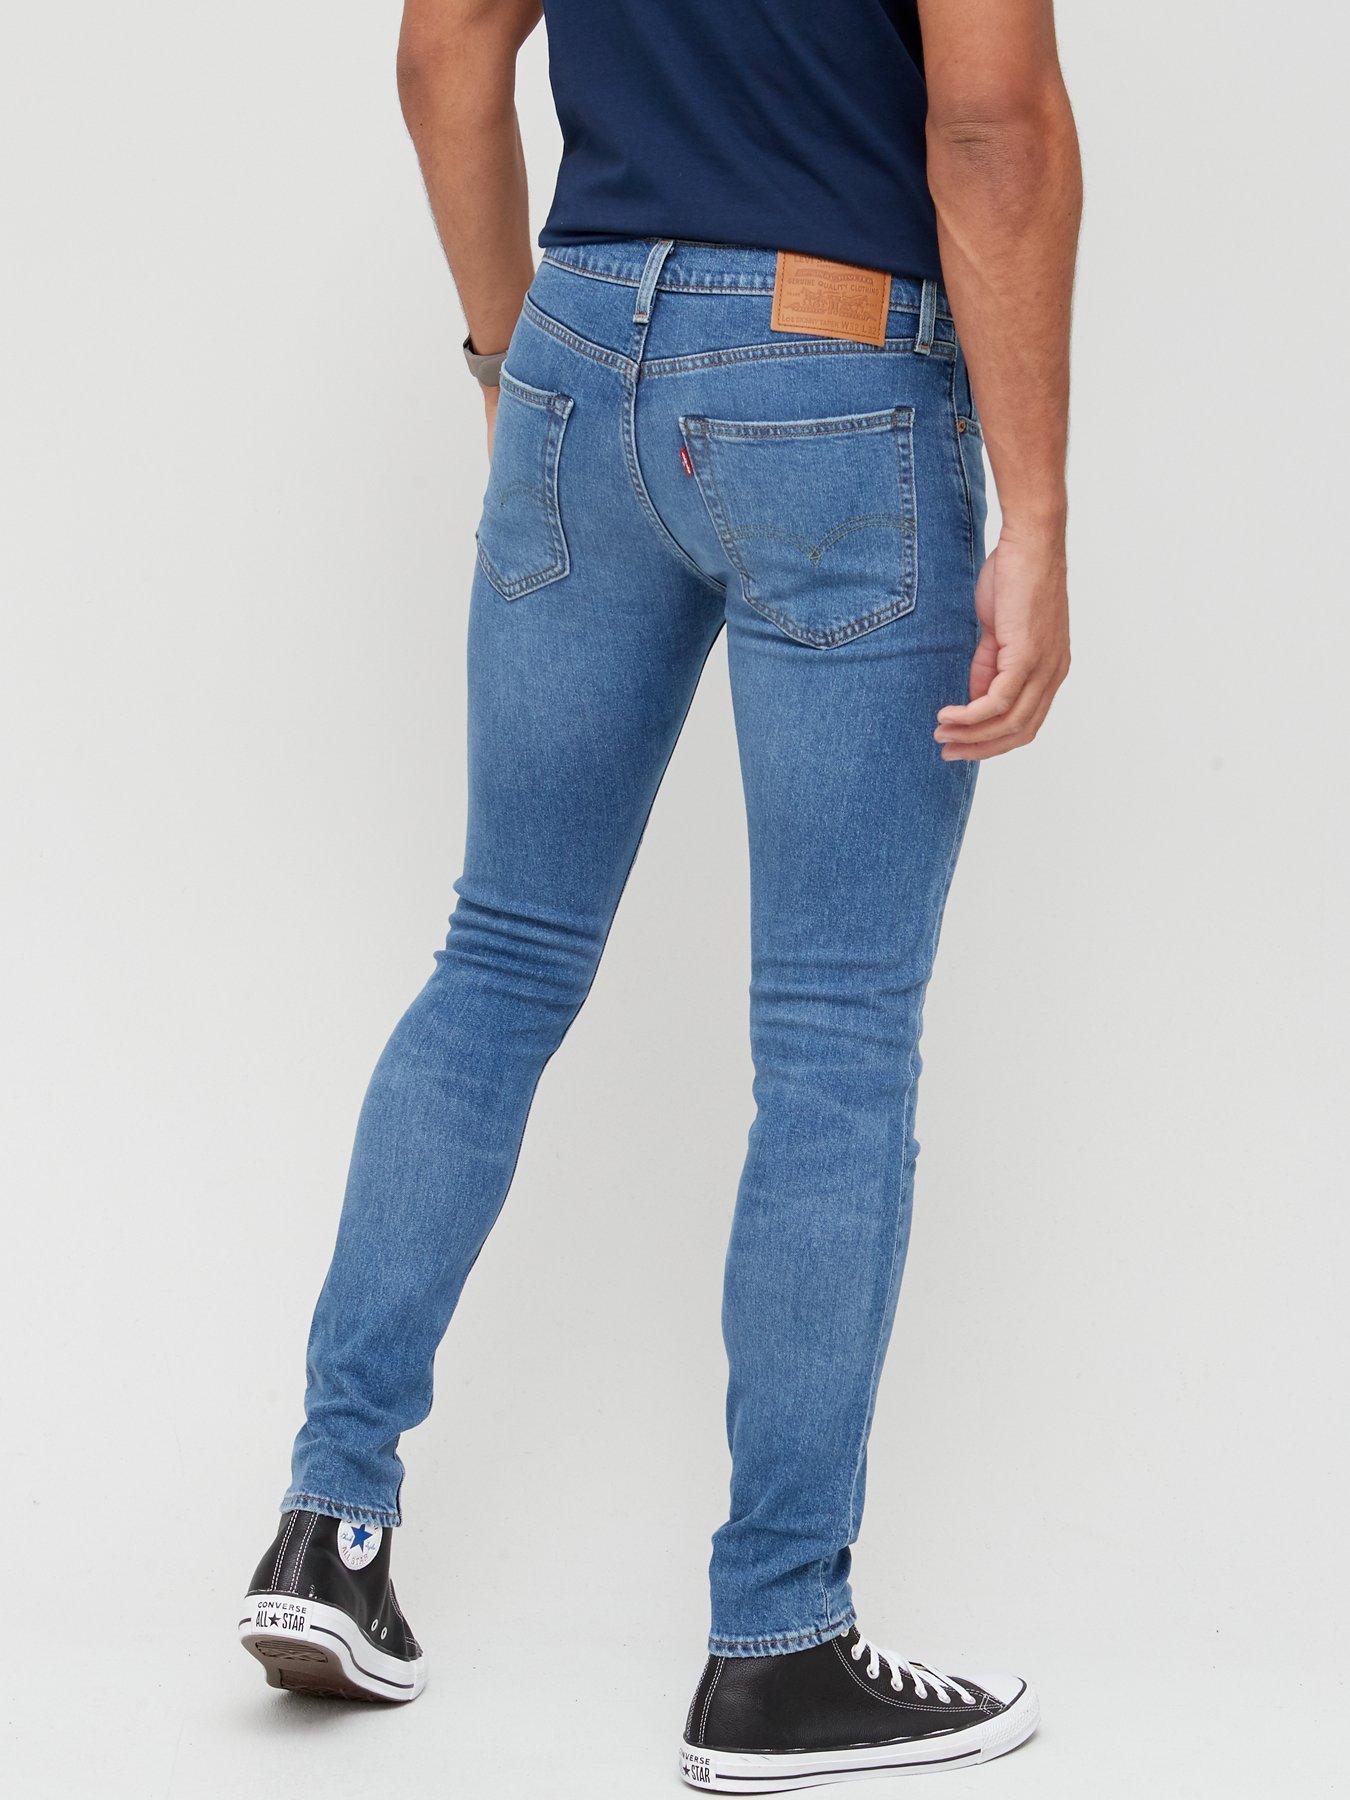 Levi's Skinny Taper Fit Jeans - Mid Wash | very.co.uk